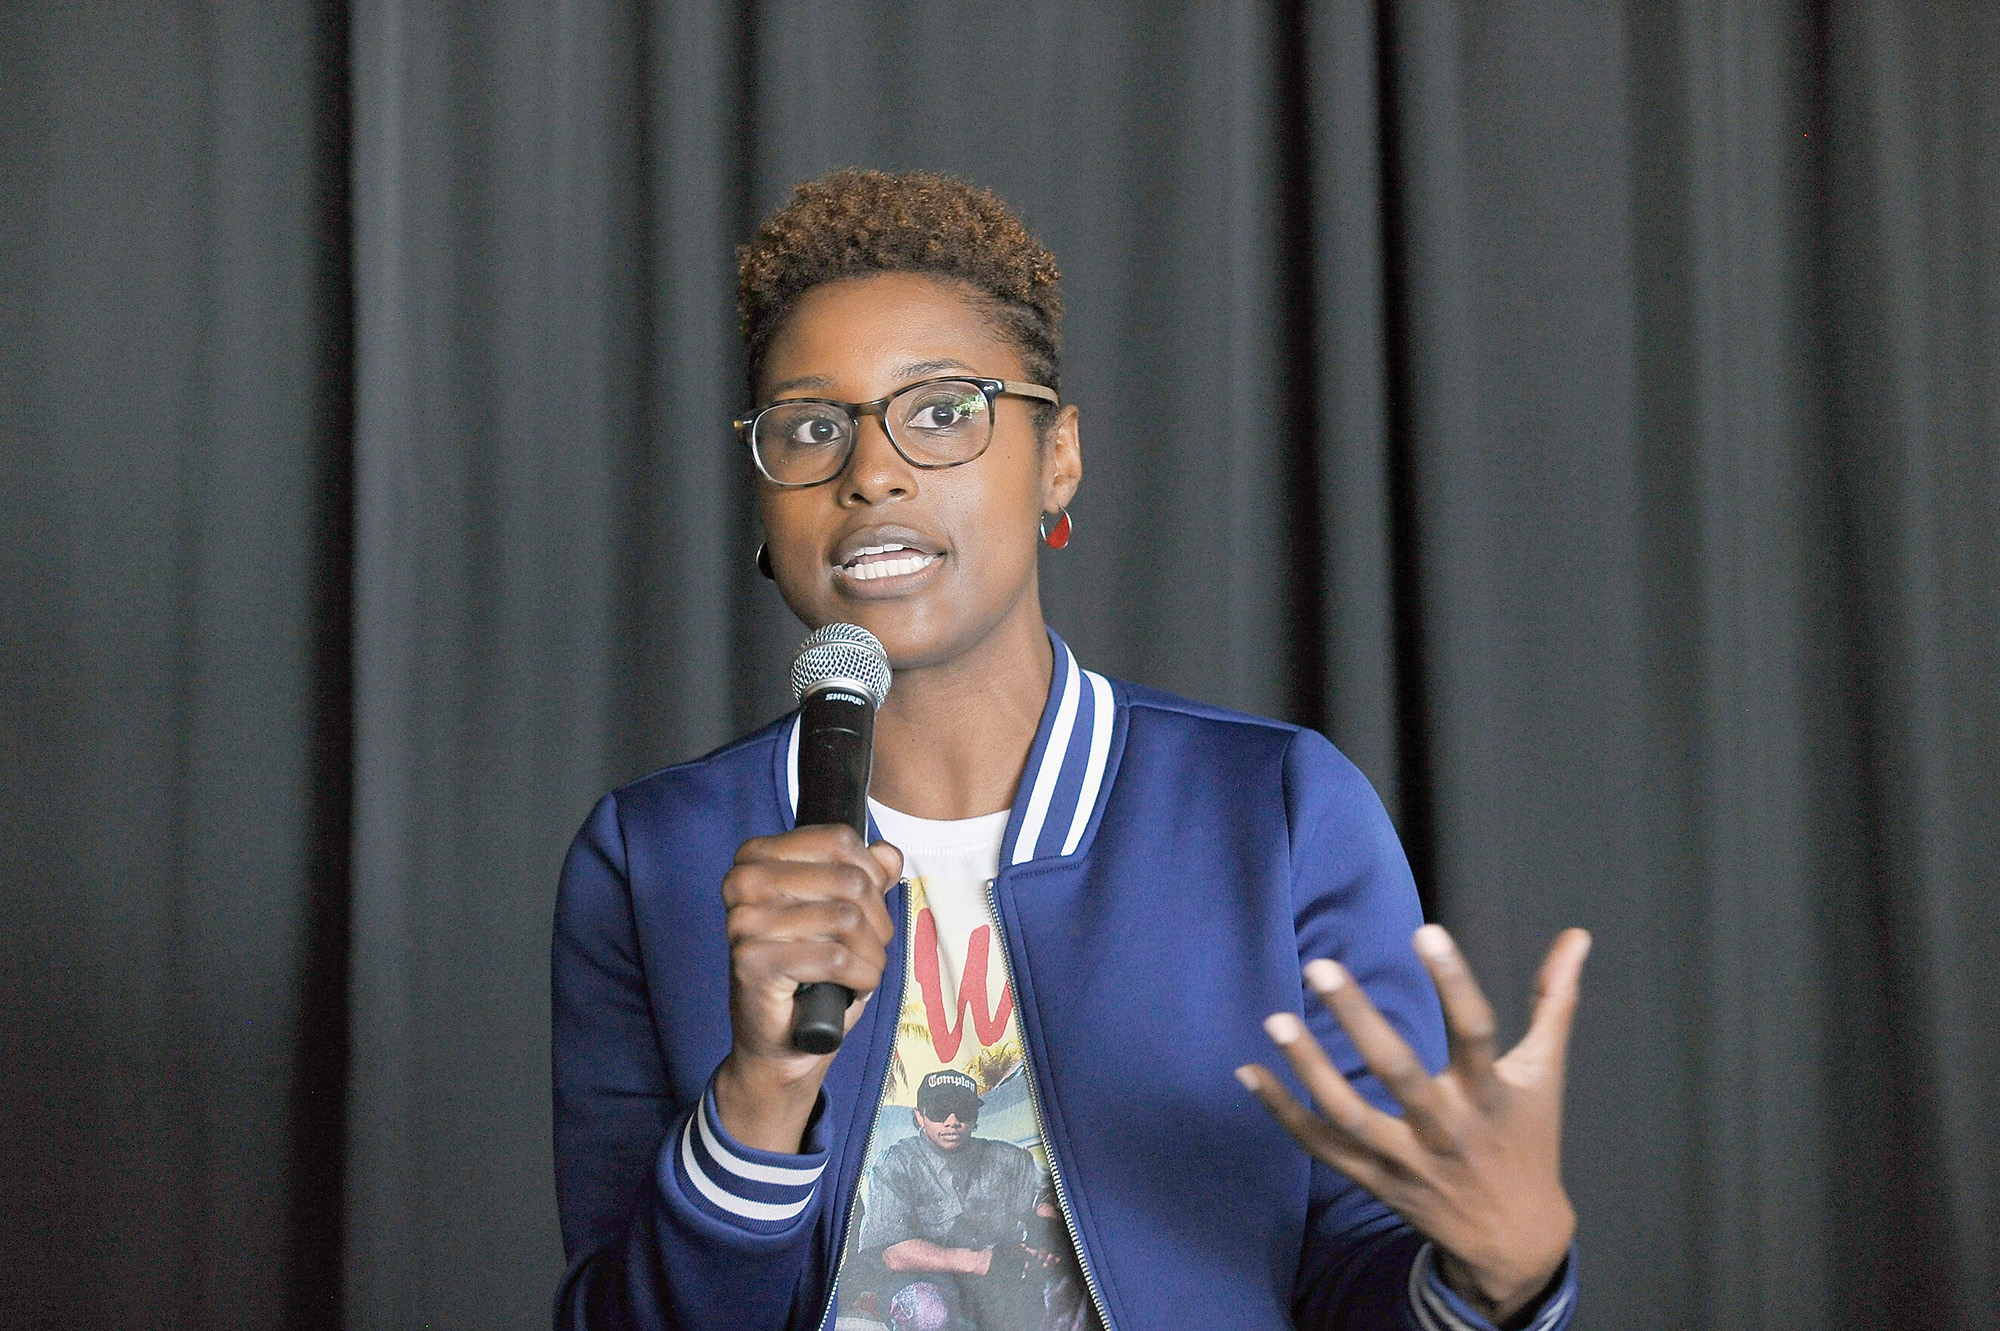 Issa Rae speaks onstage at the Diversity Speaks Panel during the 2016 Los Angeles Film Festival on June 4, 2016 in Culver City, California.  (Photo by Jerod Harris/WireImage) (Jerod Harris&mdash;WireImage)